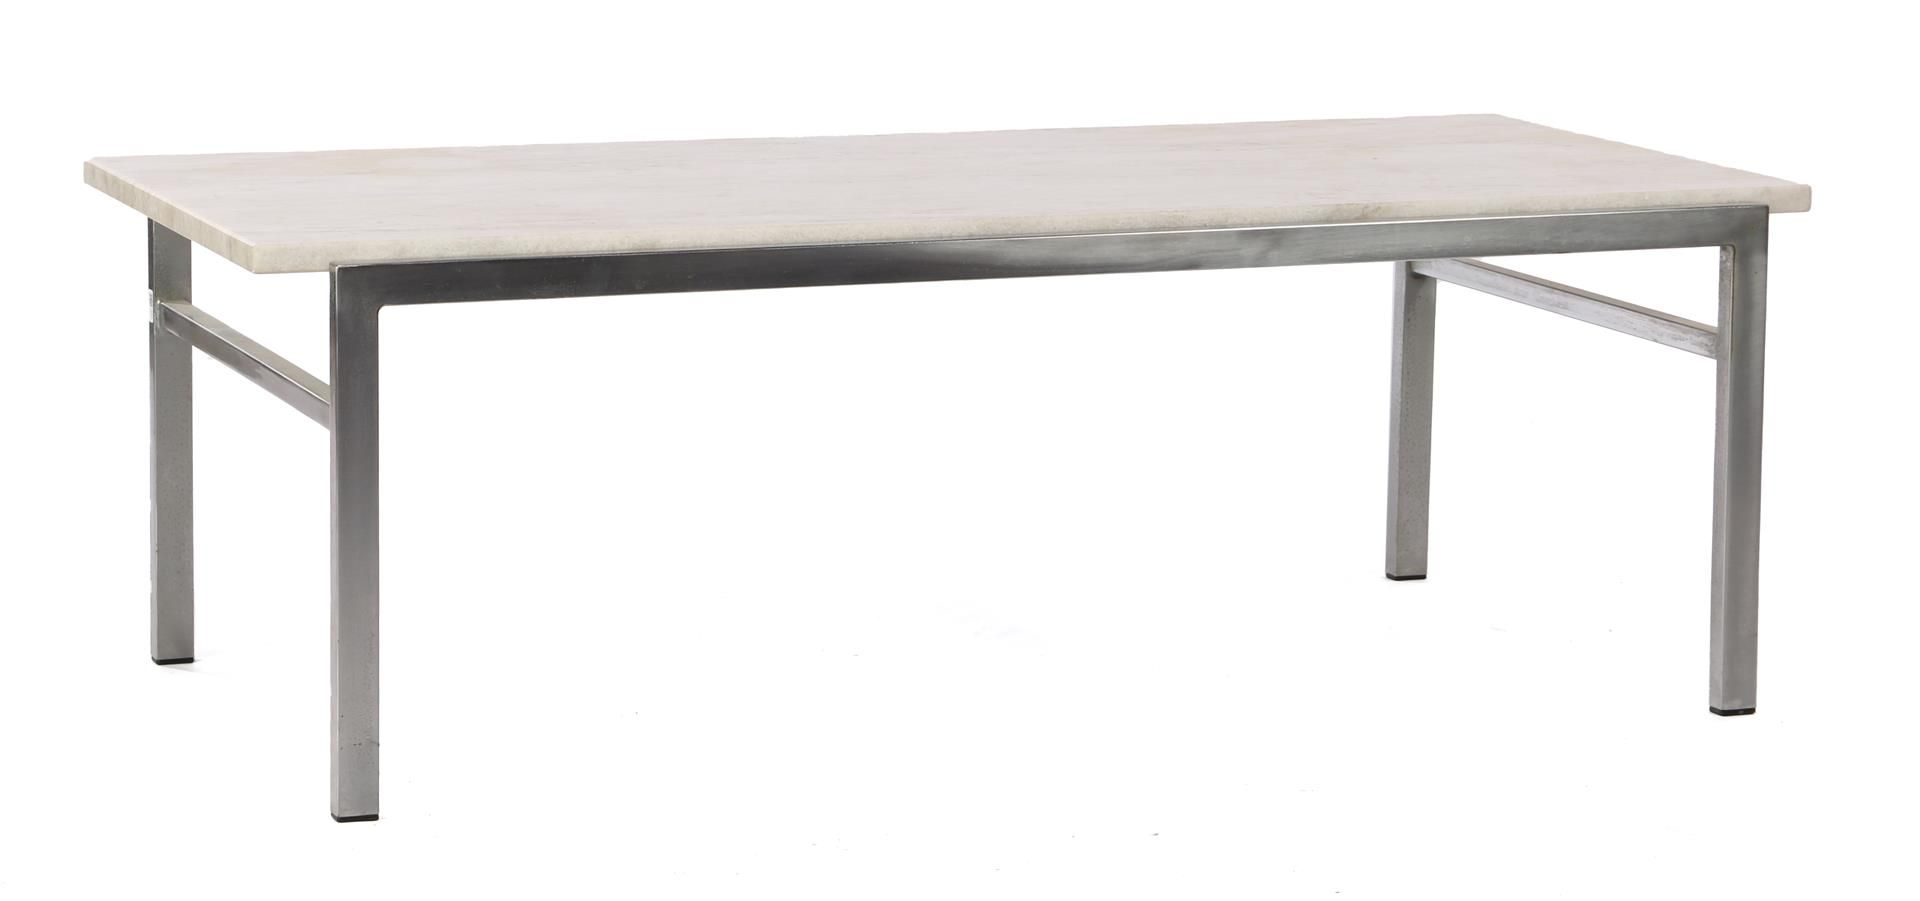 Coffee table with natural stone top on chrome base